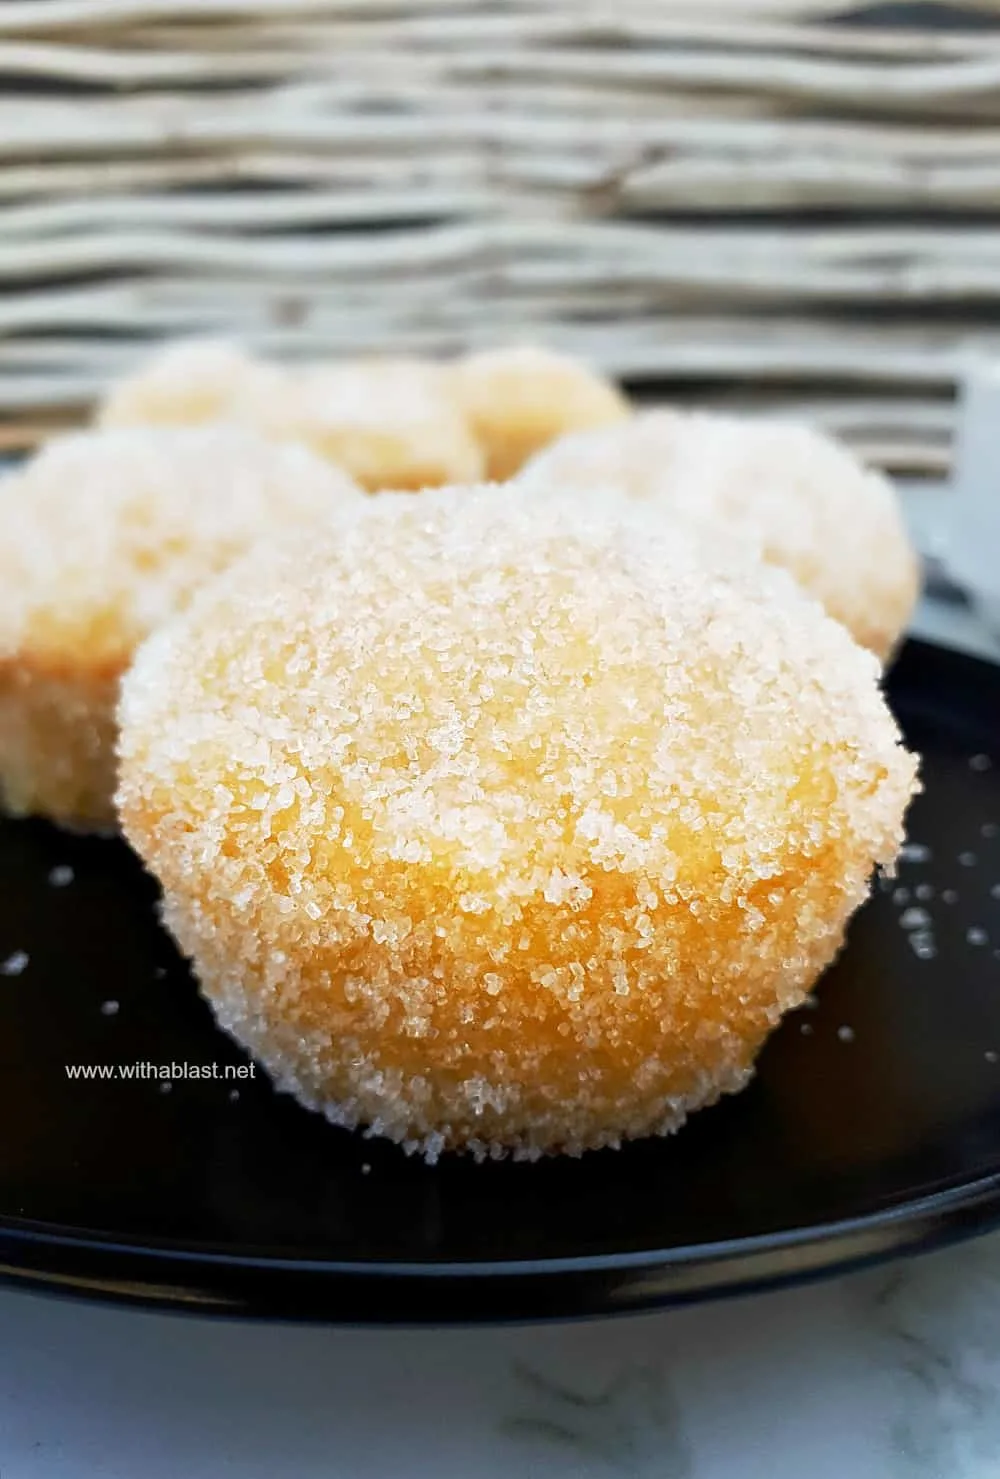 Sugar Donut Muffins are a cross between a donut and a muffin and always a winner to add to a sweet party platter - so quick and easy to make too !